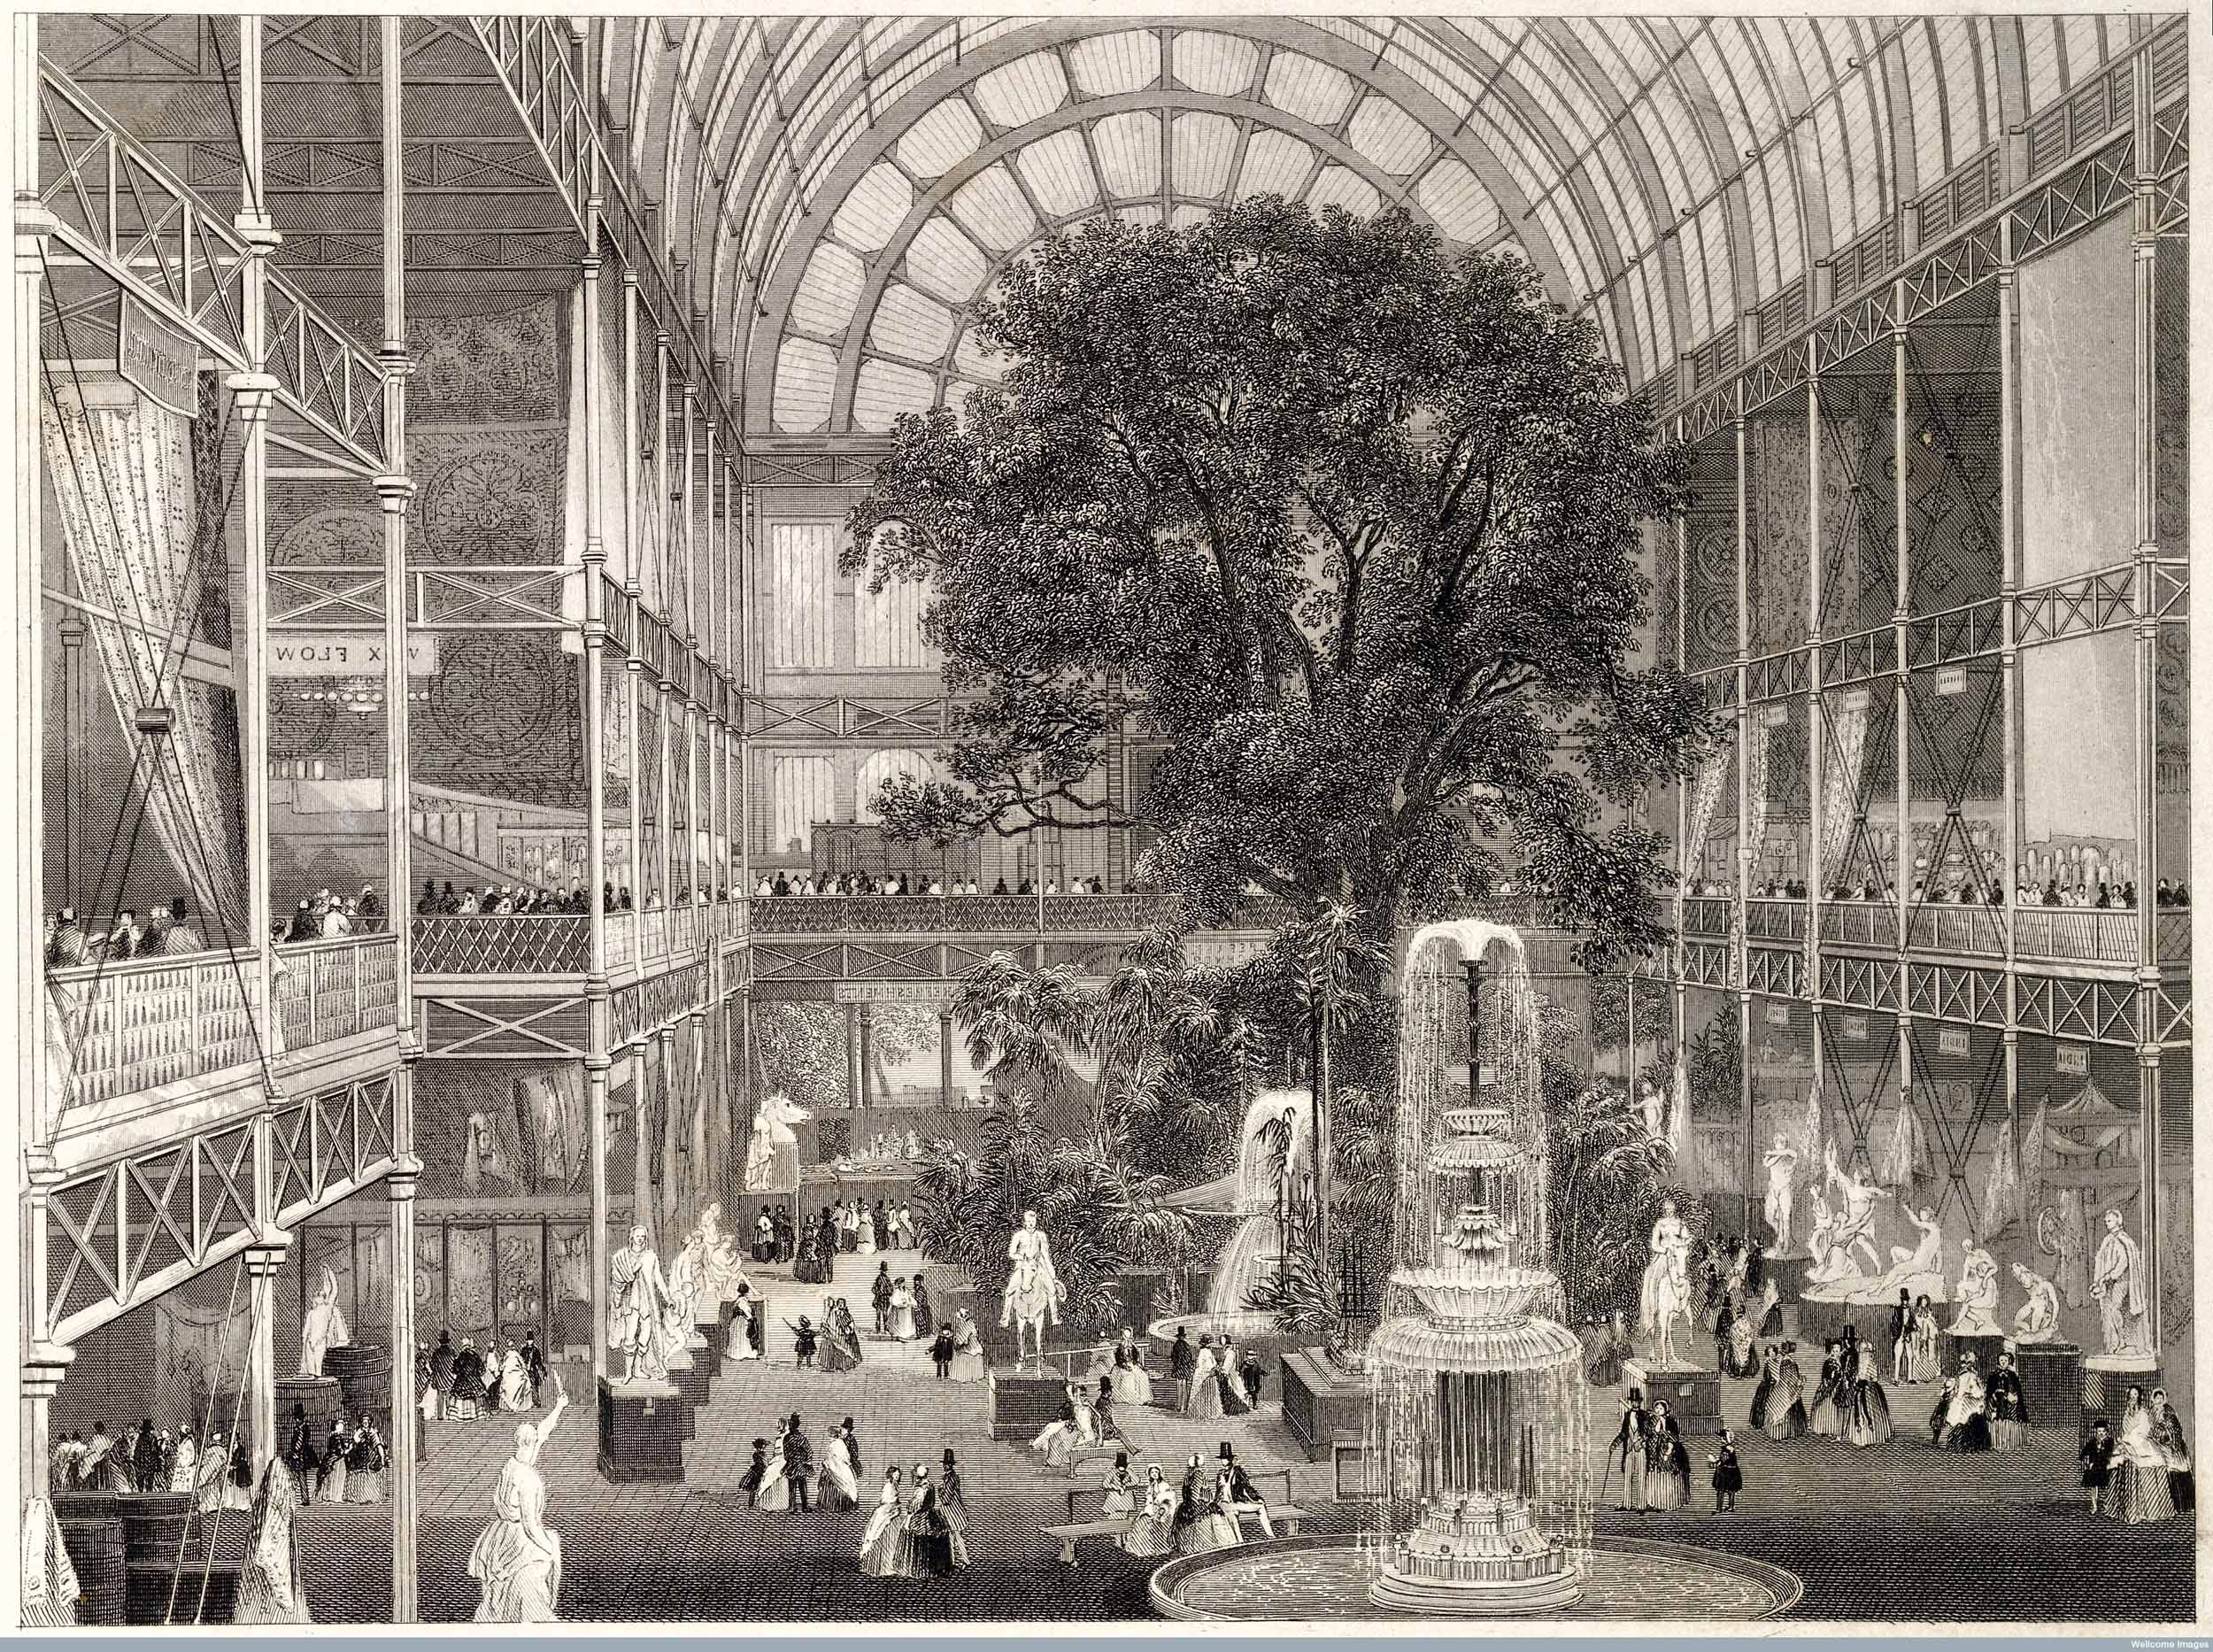 Steel engraving: 1851 Great Exhibition, Crystal Palace. Copyright Wellcome Library, London. Creative Commons Attribution 4.0 International (https://creativecommons.org/licenses/by/4.0/).